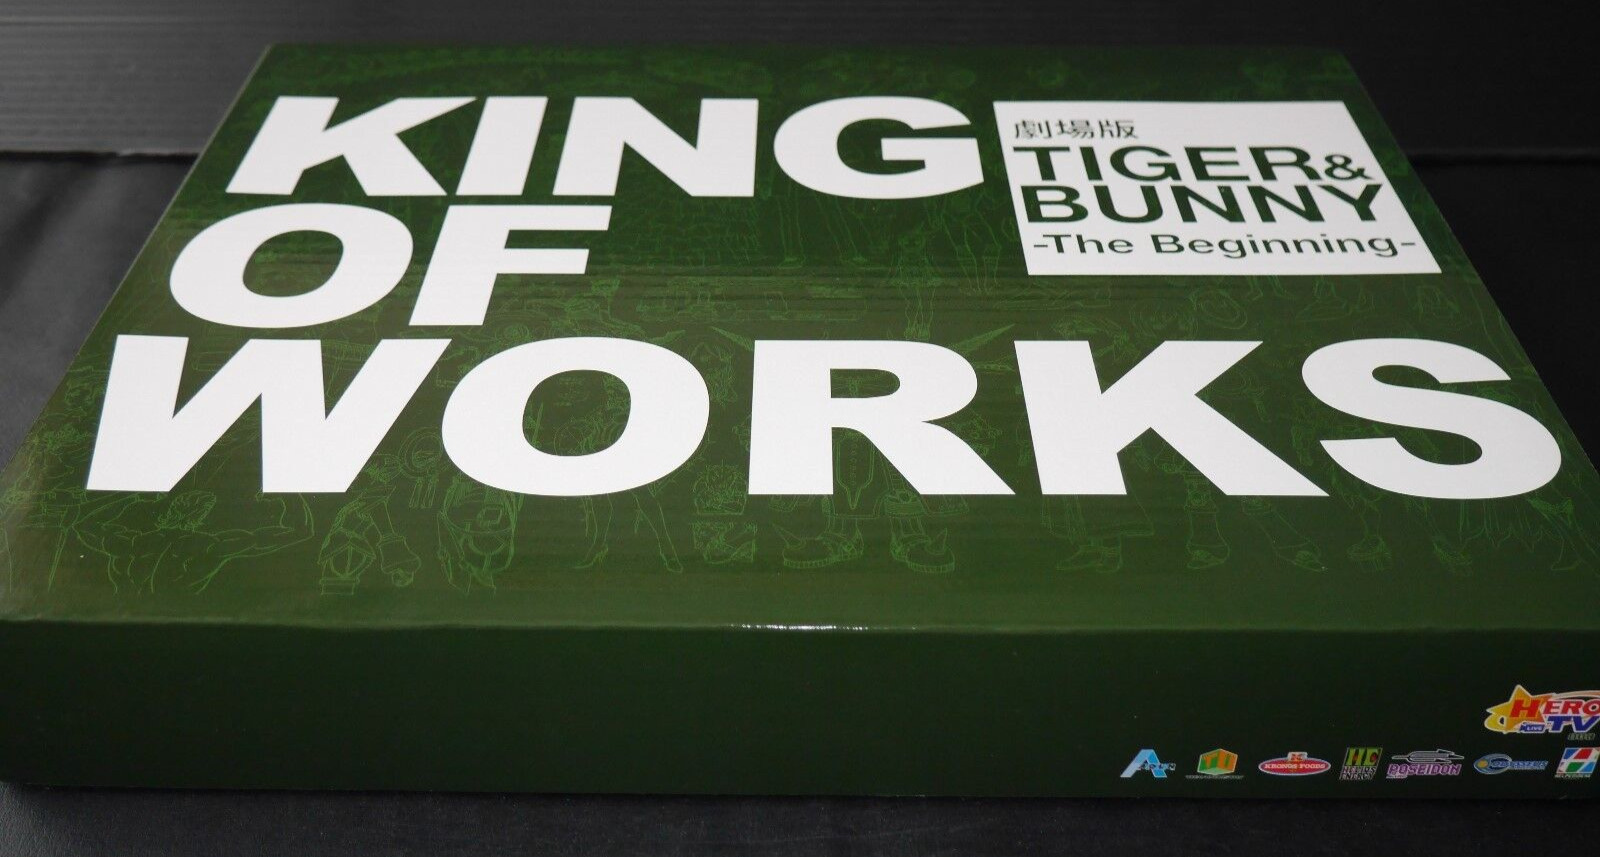 Tiger & Bunny - The Beginning : King of Works - JAPAN